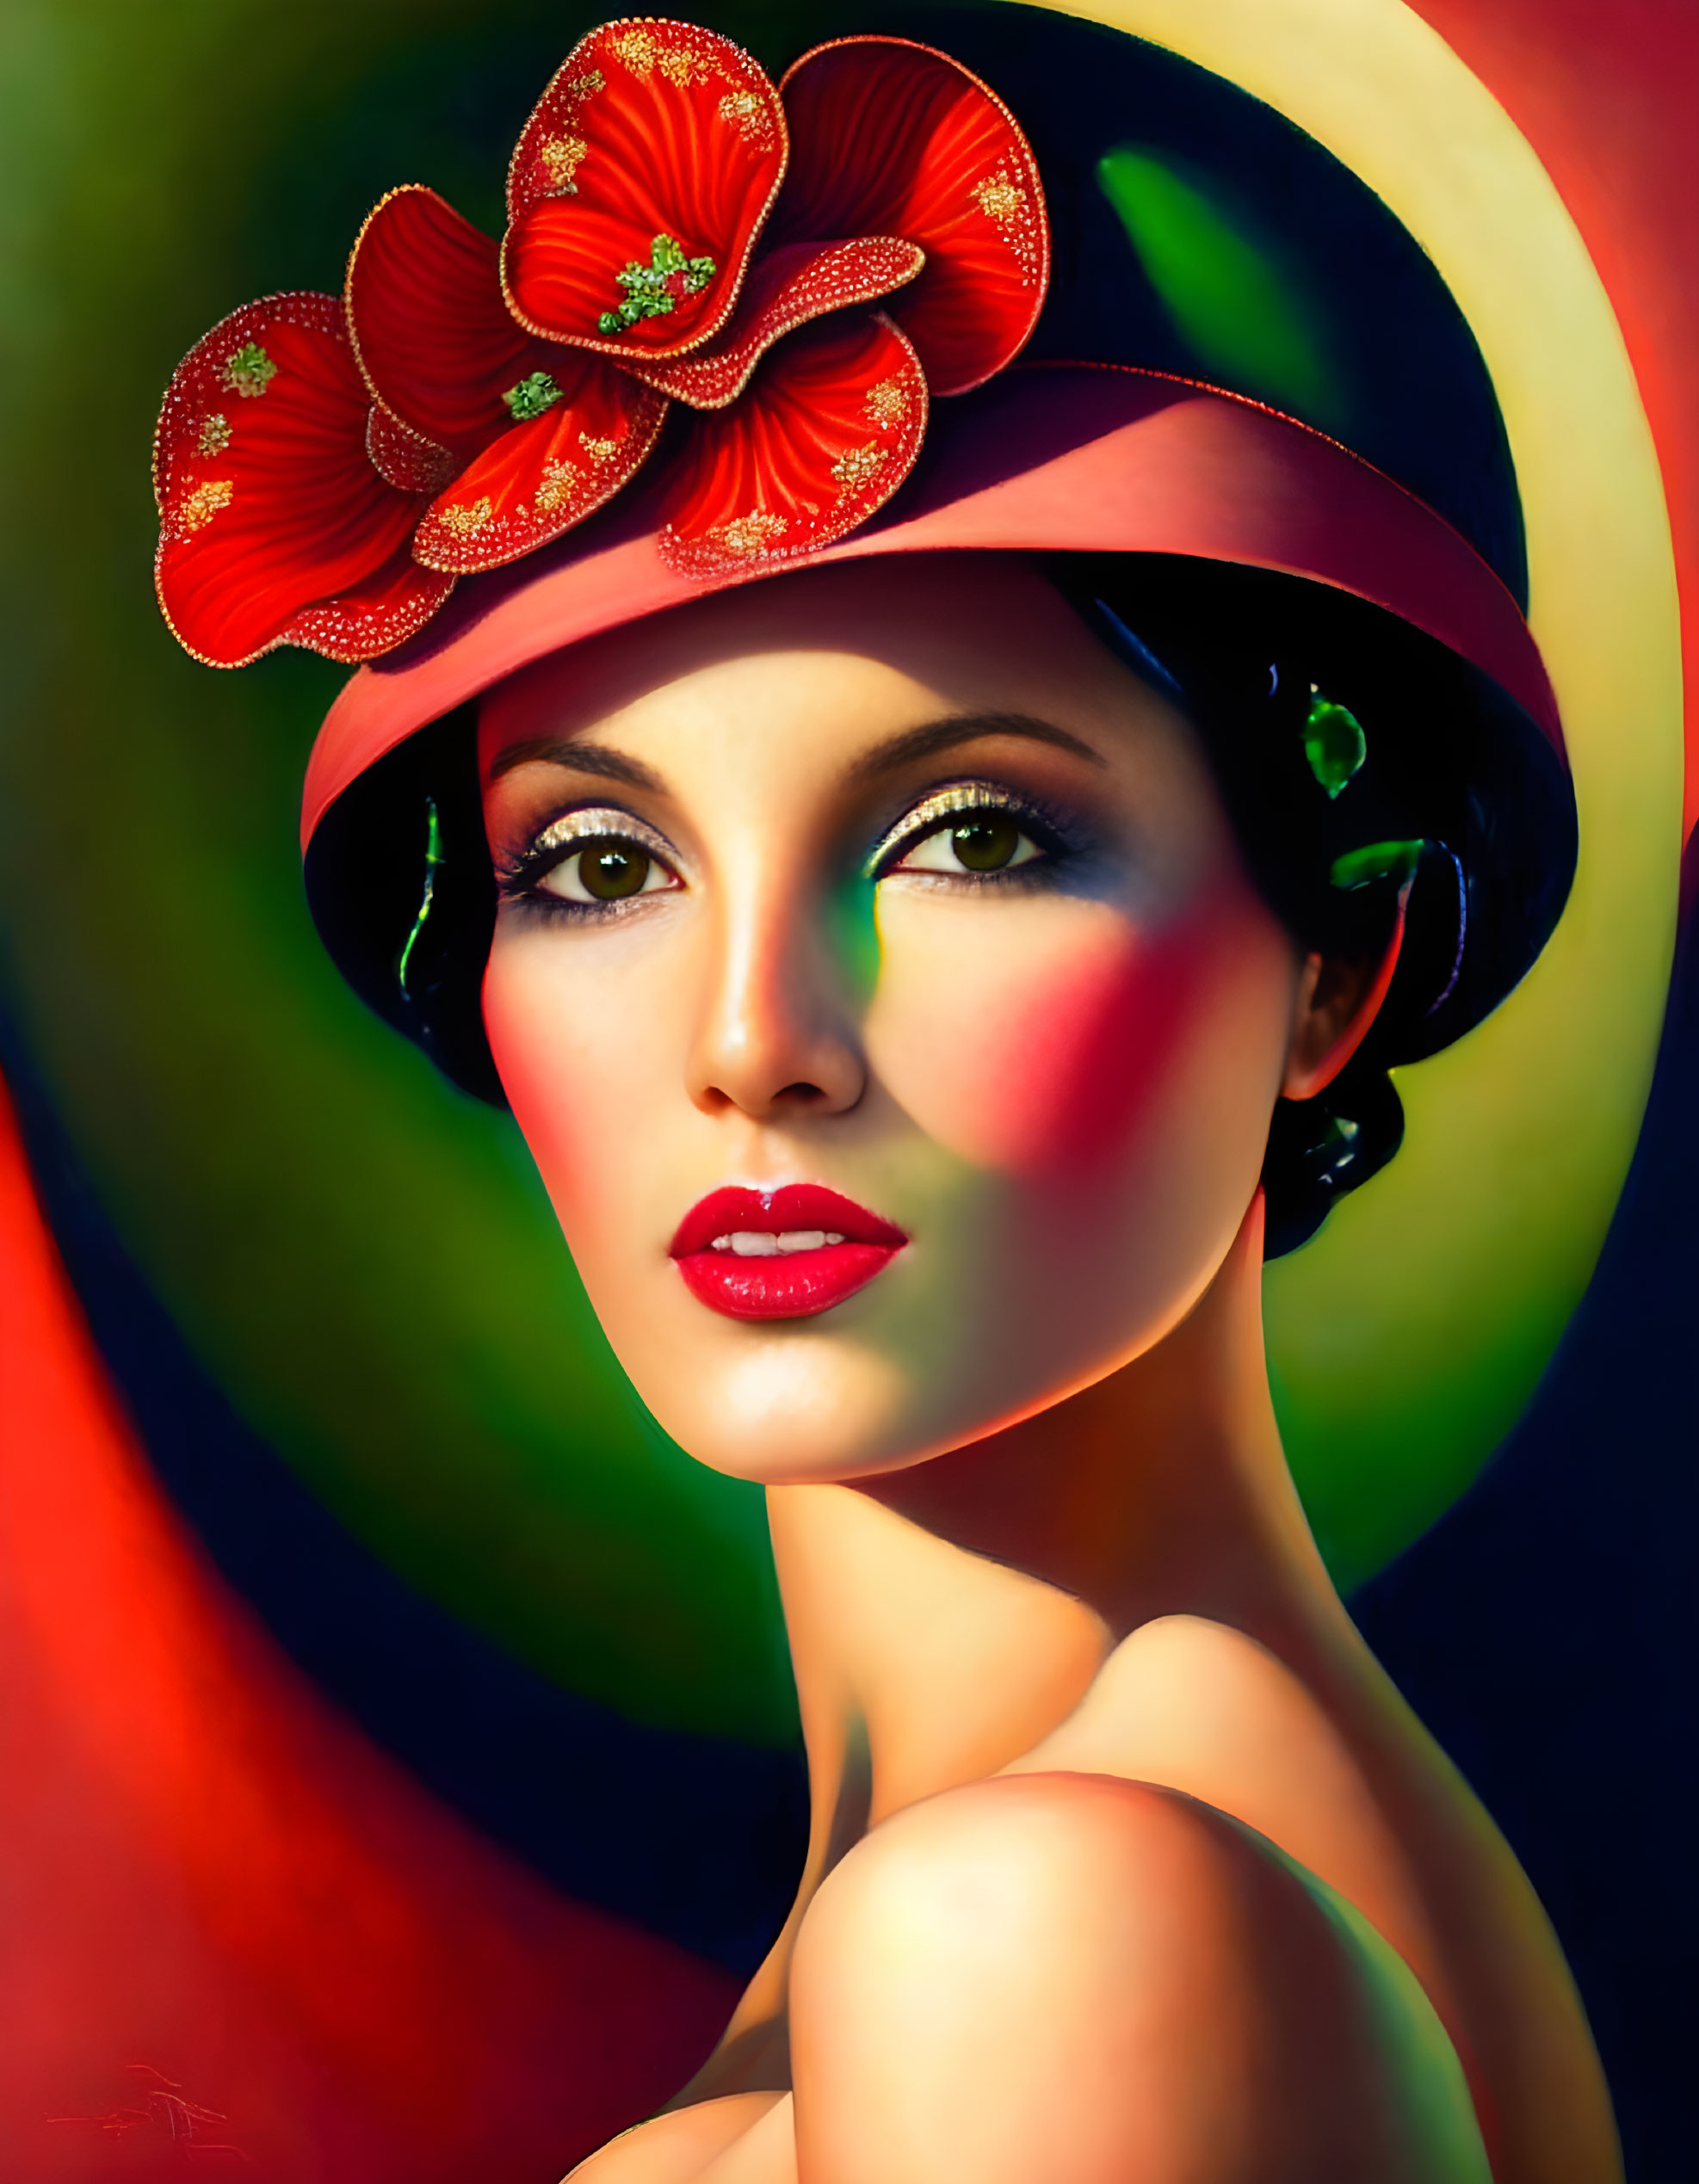 Colorful portrait of woman in red floral hat with halo background.